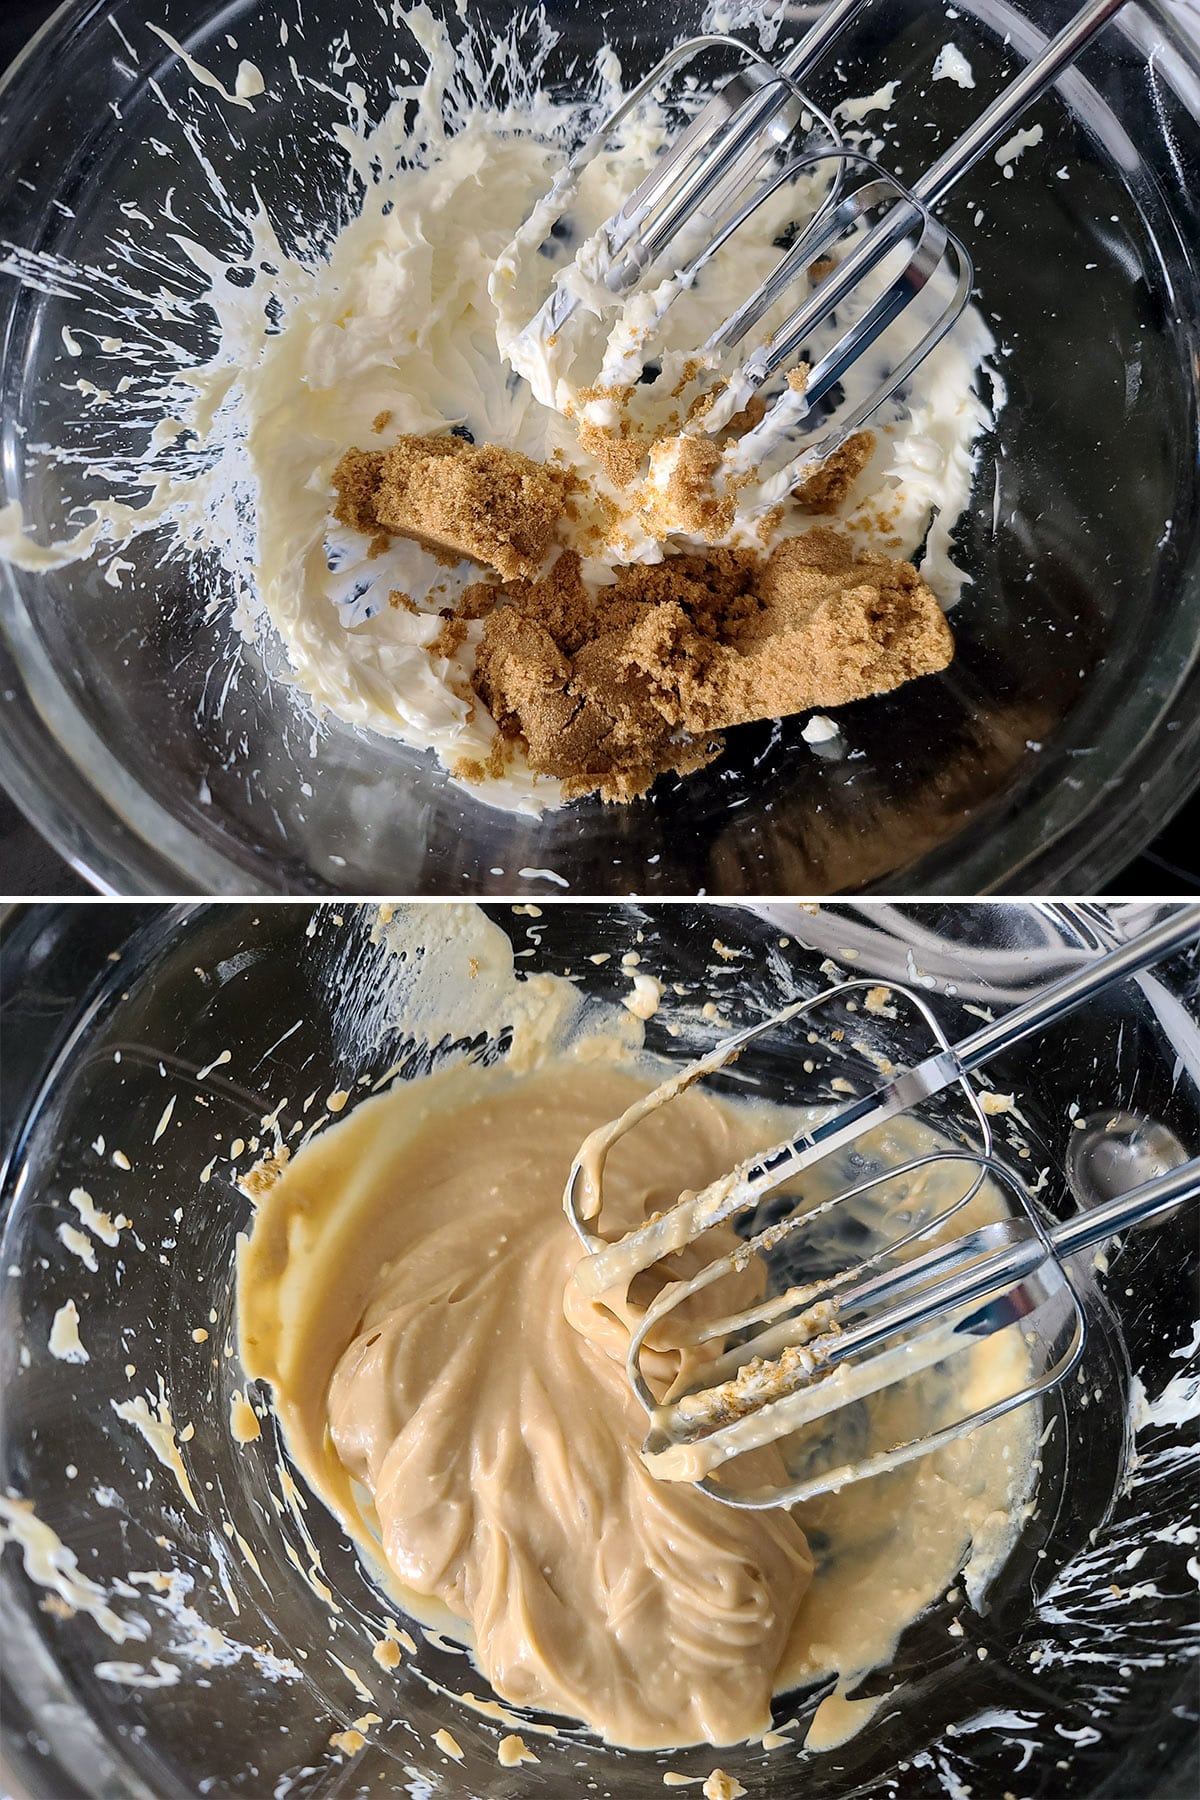 A 2 part image showing brown sugar and cream cheese being beaten together.